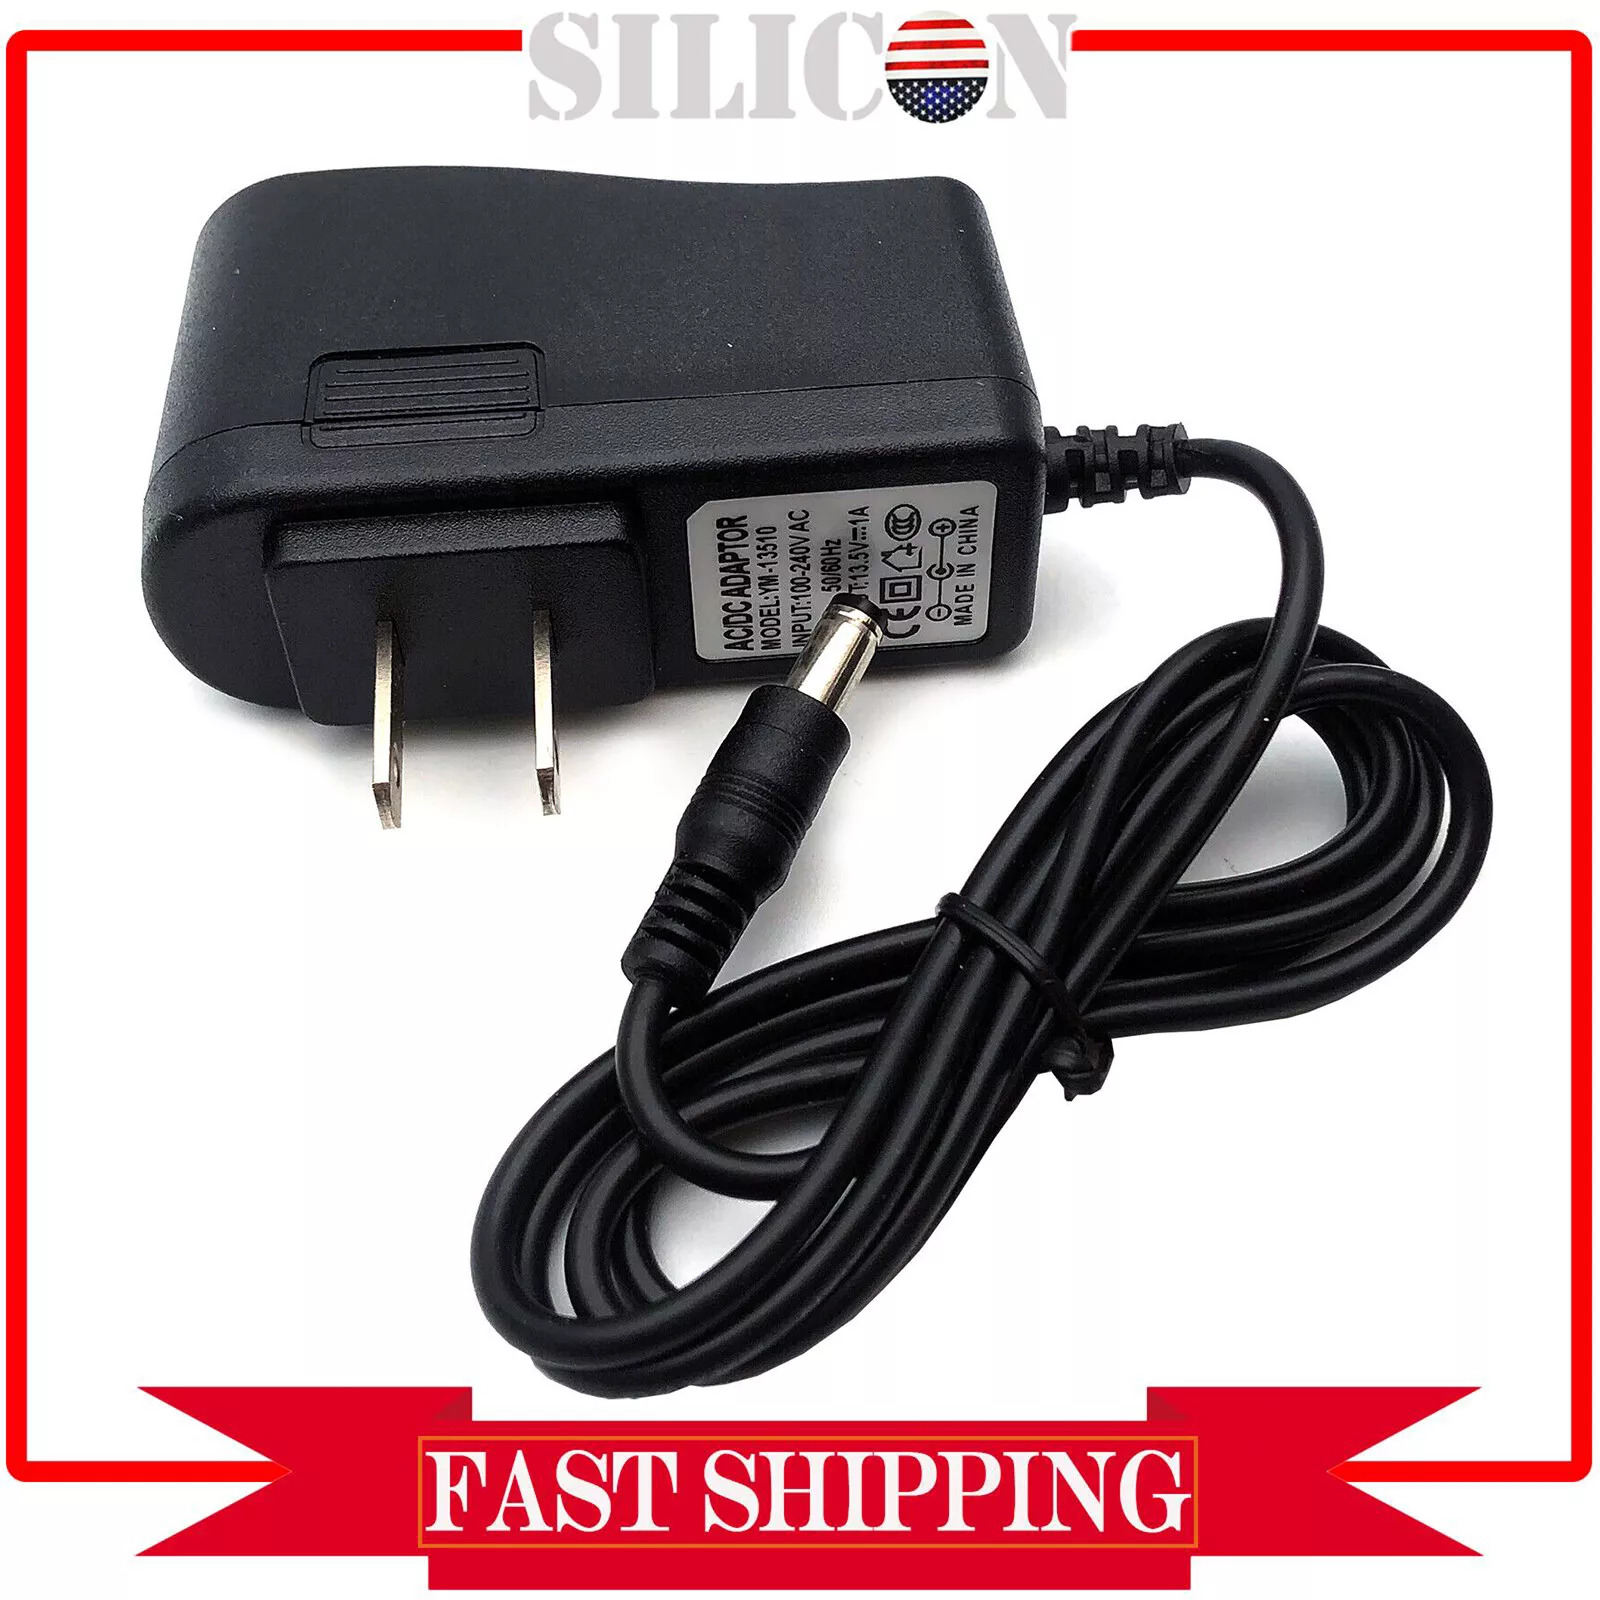 13.5V AC Adapter For Cen-Tech 62747 5-in-1 Portable Power PACK CenTech Charger